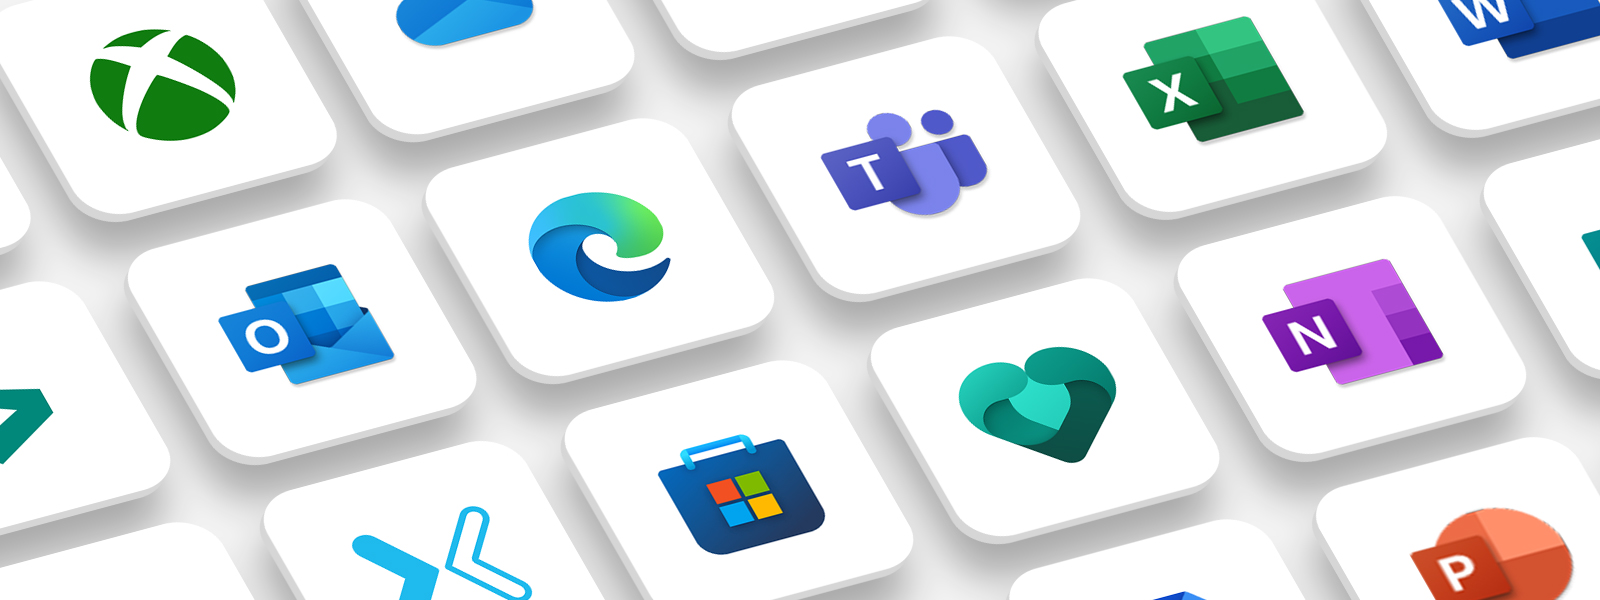 Many colourful Microsoft application icons on white background